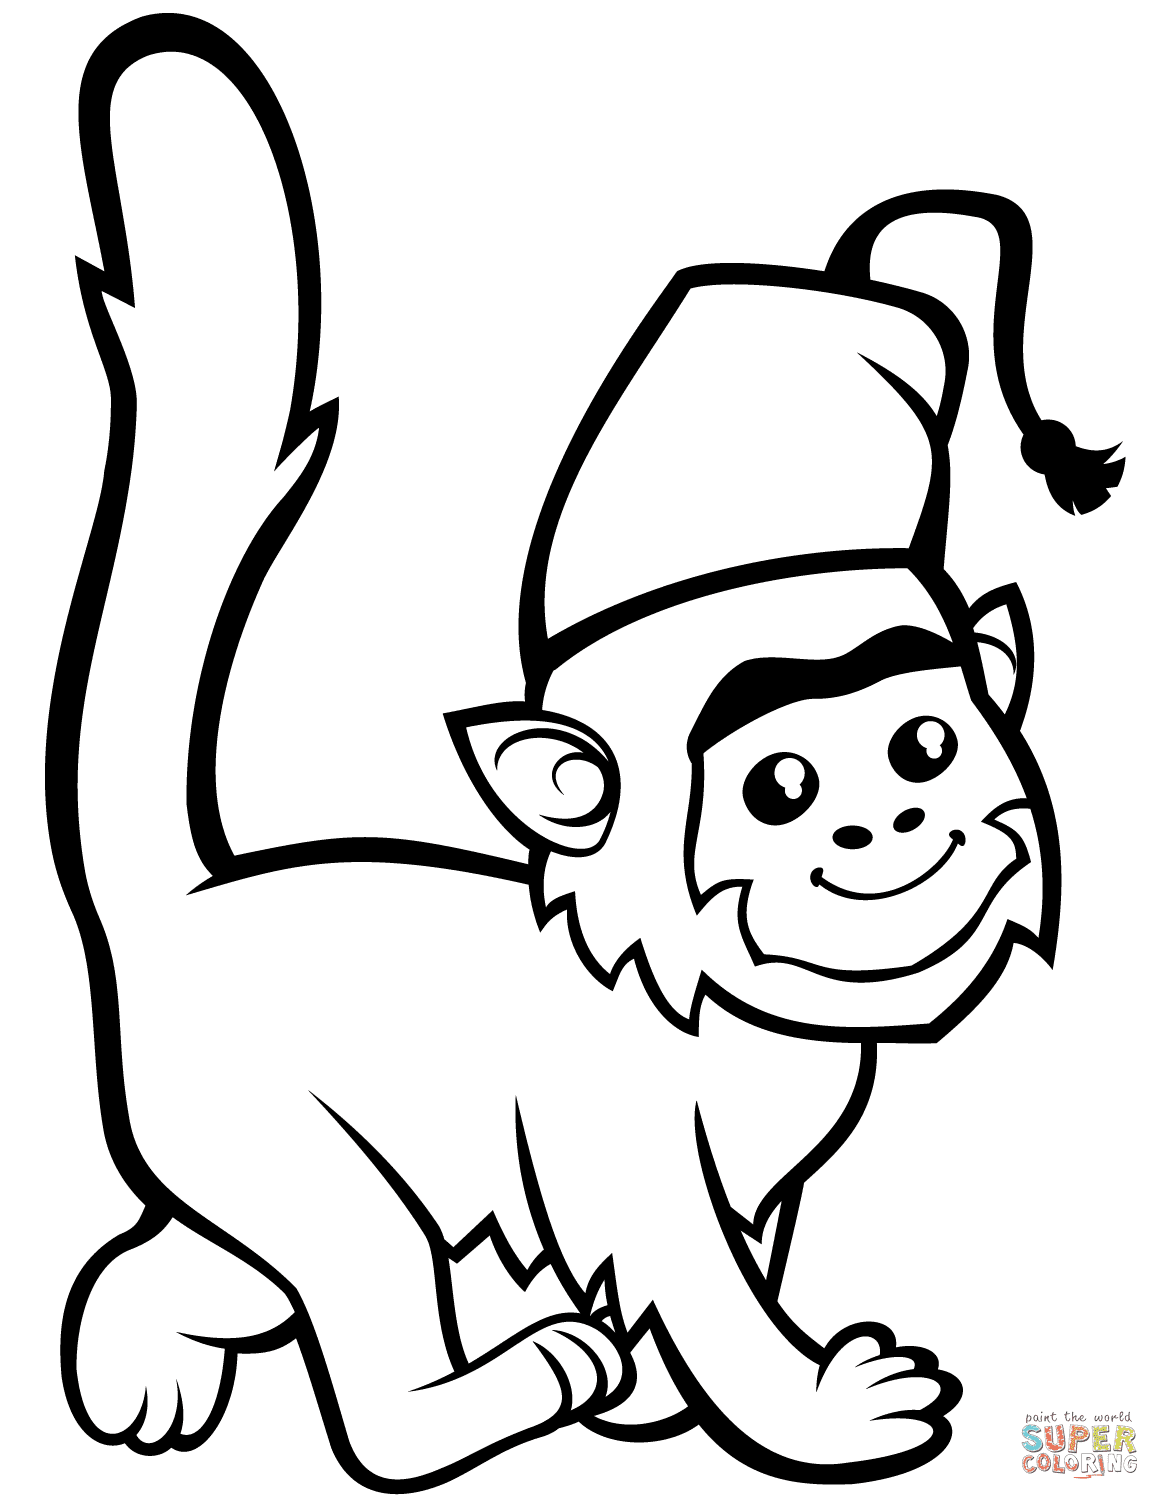 Cute Monkey In Fez Coloring Pages